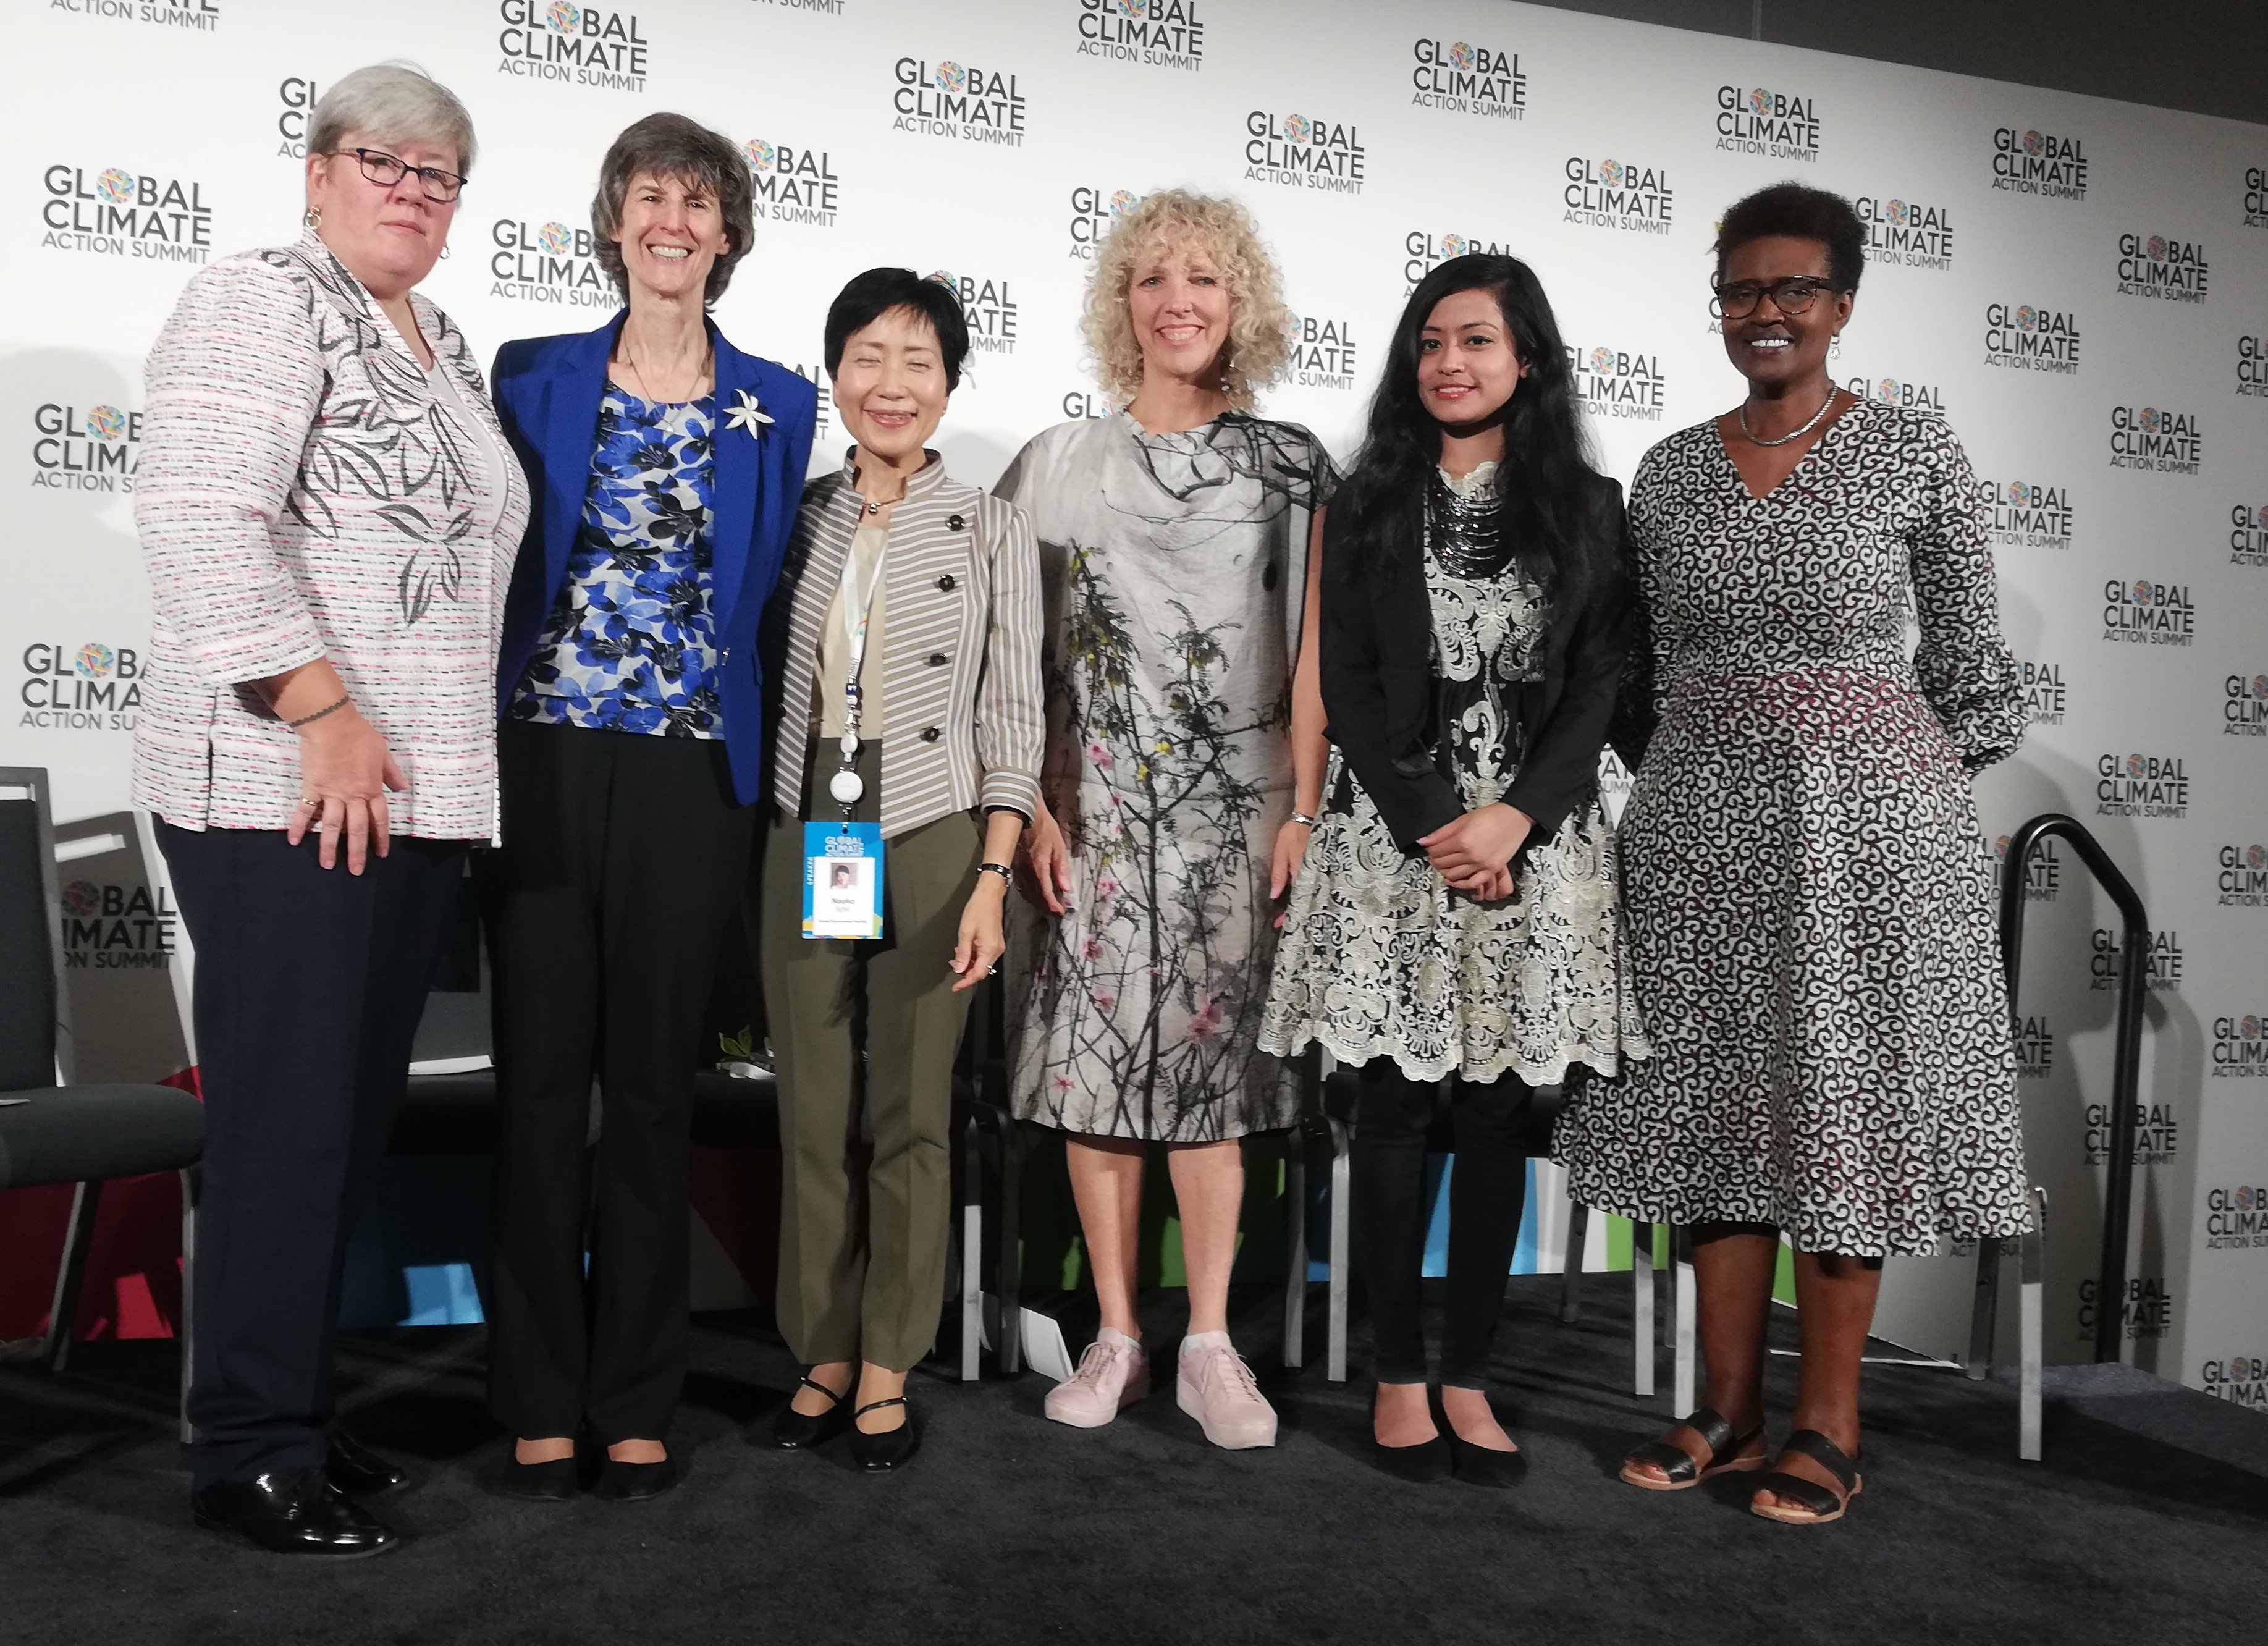 Climate champions urge action, defend vulnerable countries: 'We do not have time to waste'